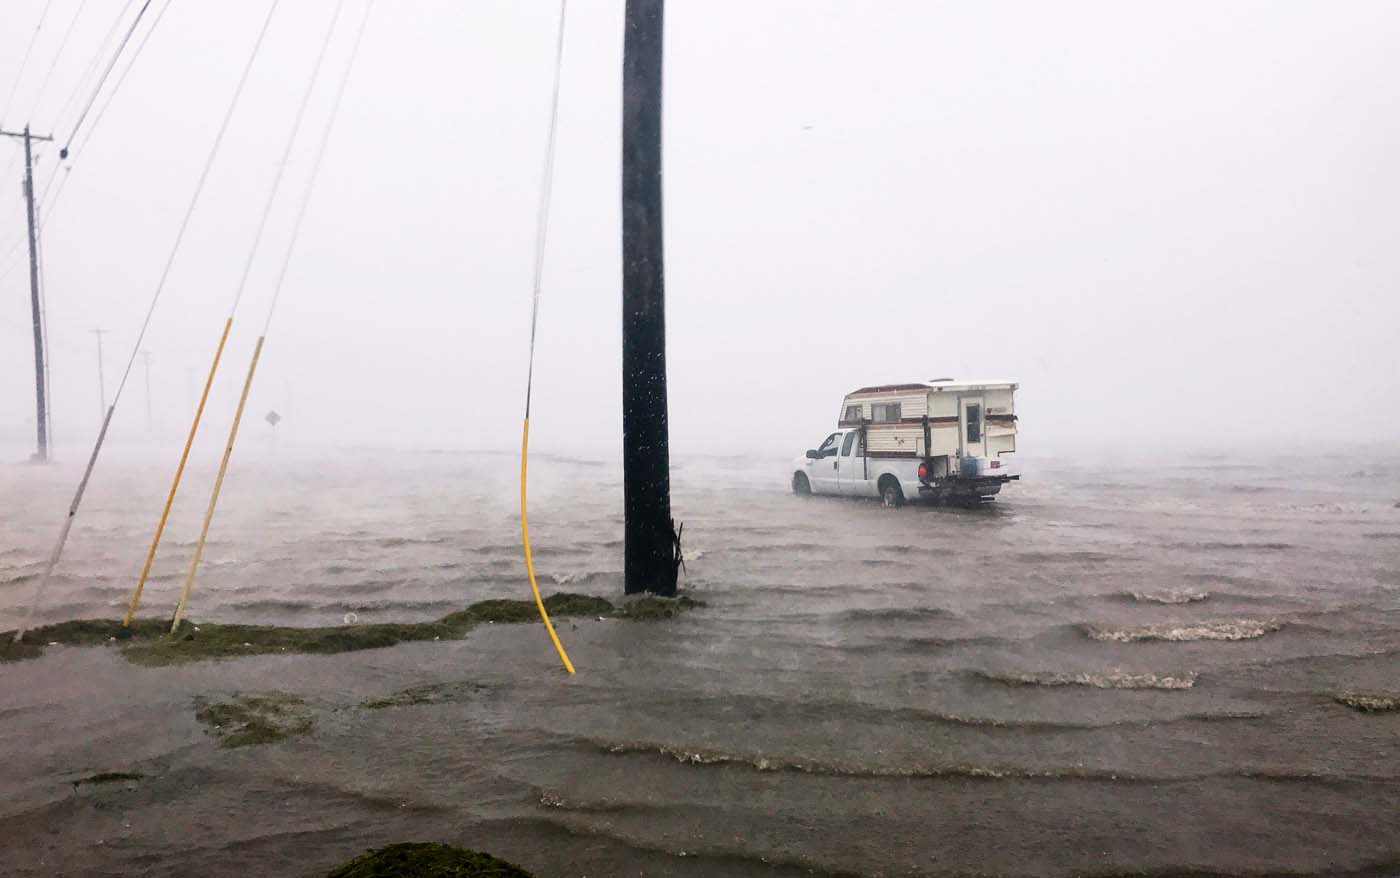 Craig "Cajun" Uggen, 57, nearly floods his truck as Hurricane Harvey comes ashore in Corpus Christi, Texas, U.S. August 25, 2017. Minutes later, high winds blew off the camper carrying all of his belongings. REUTERS/Brian Thevenot